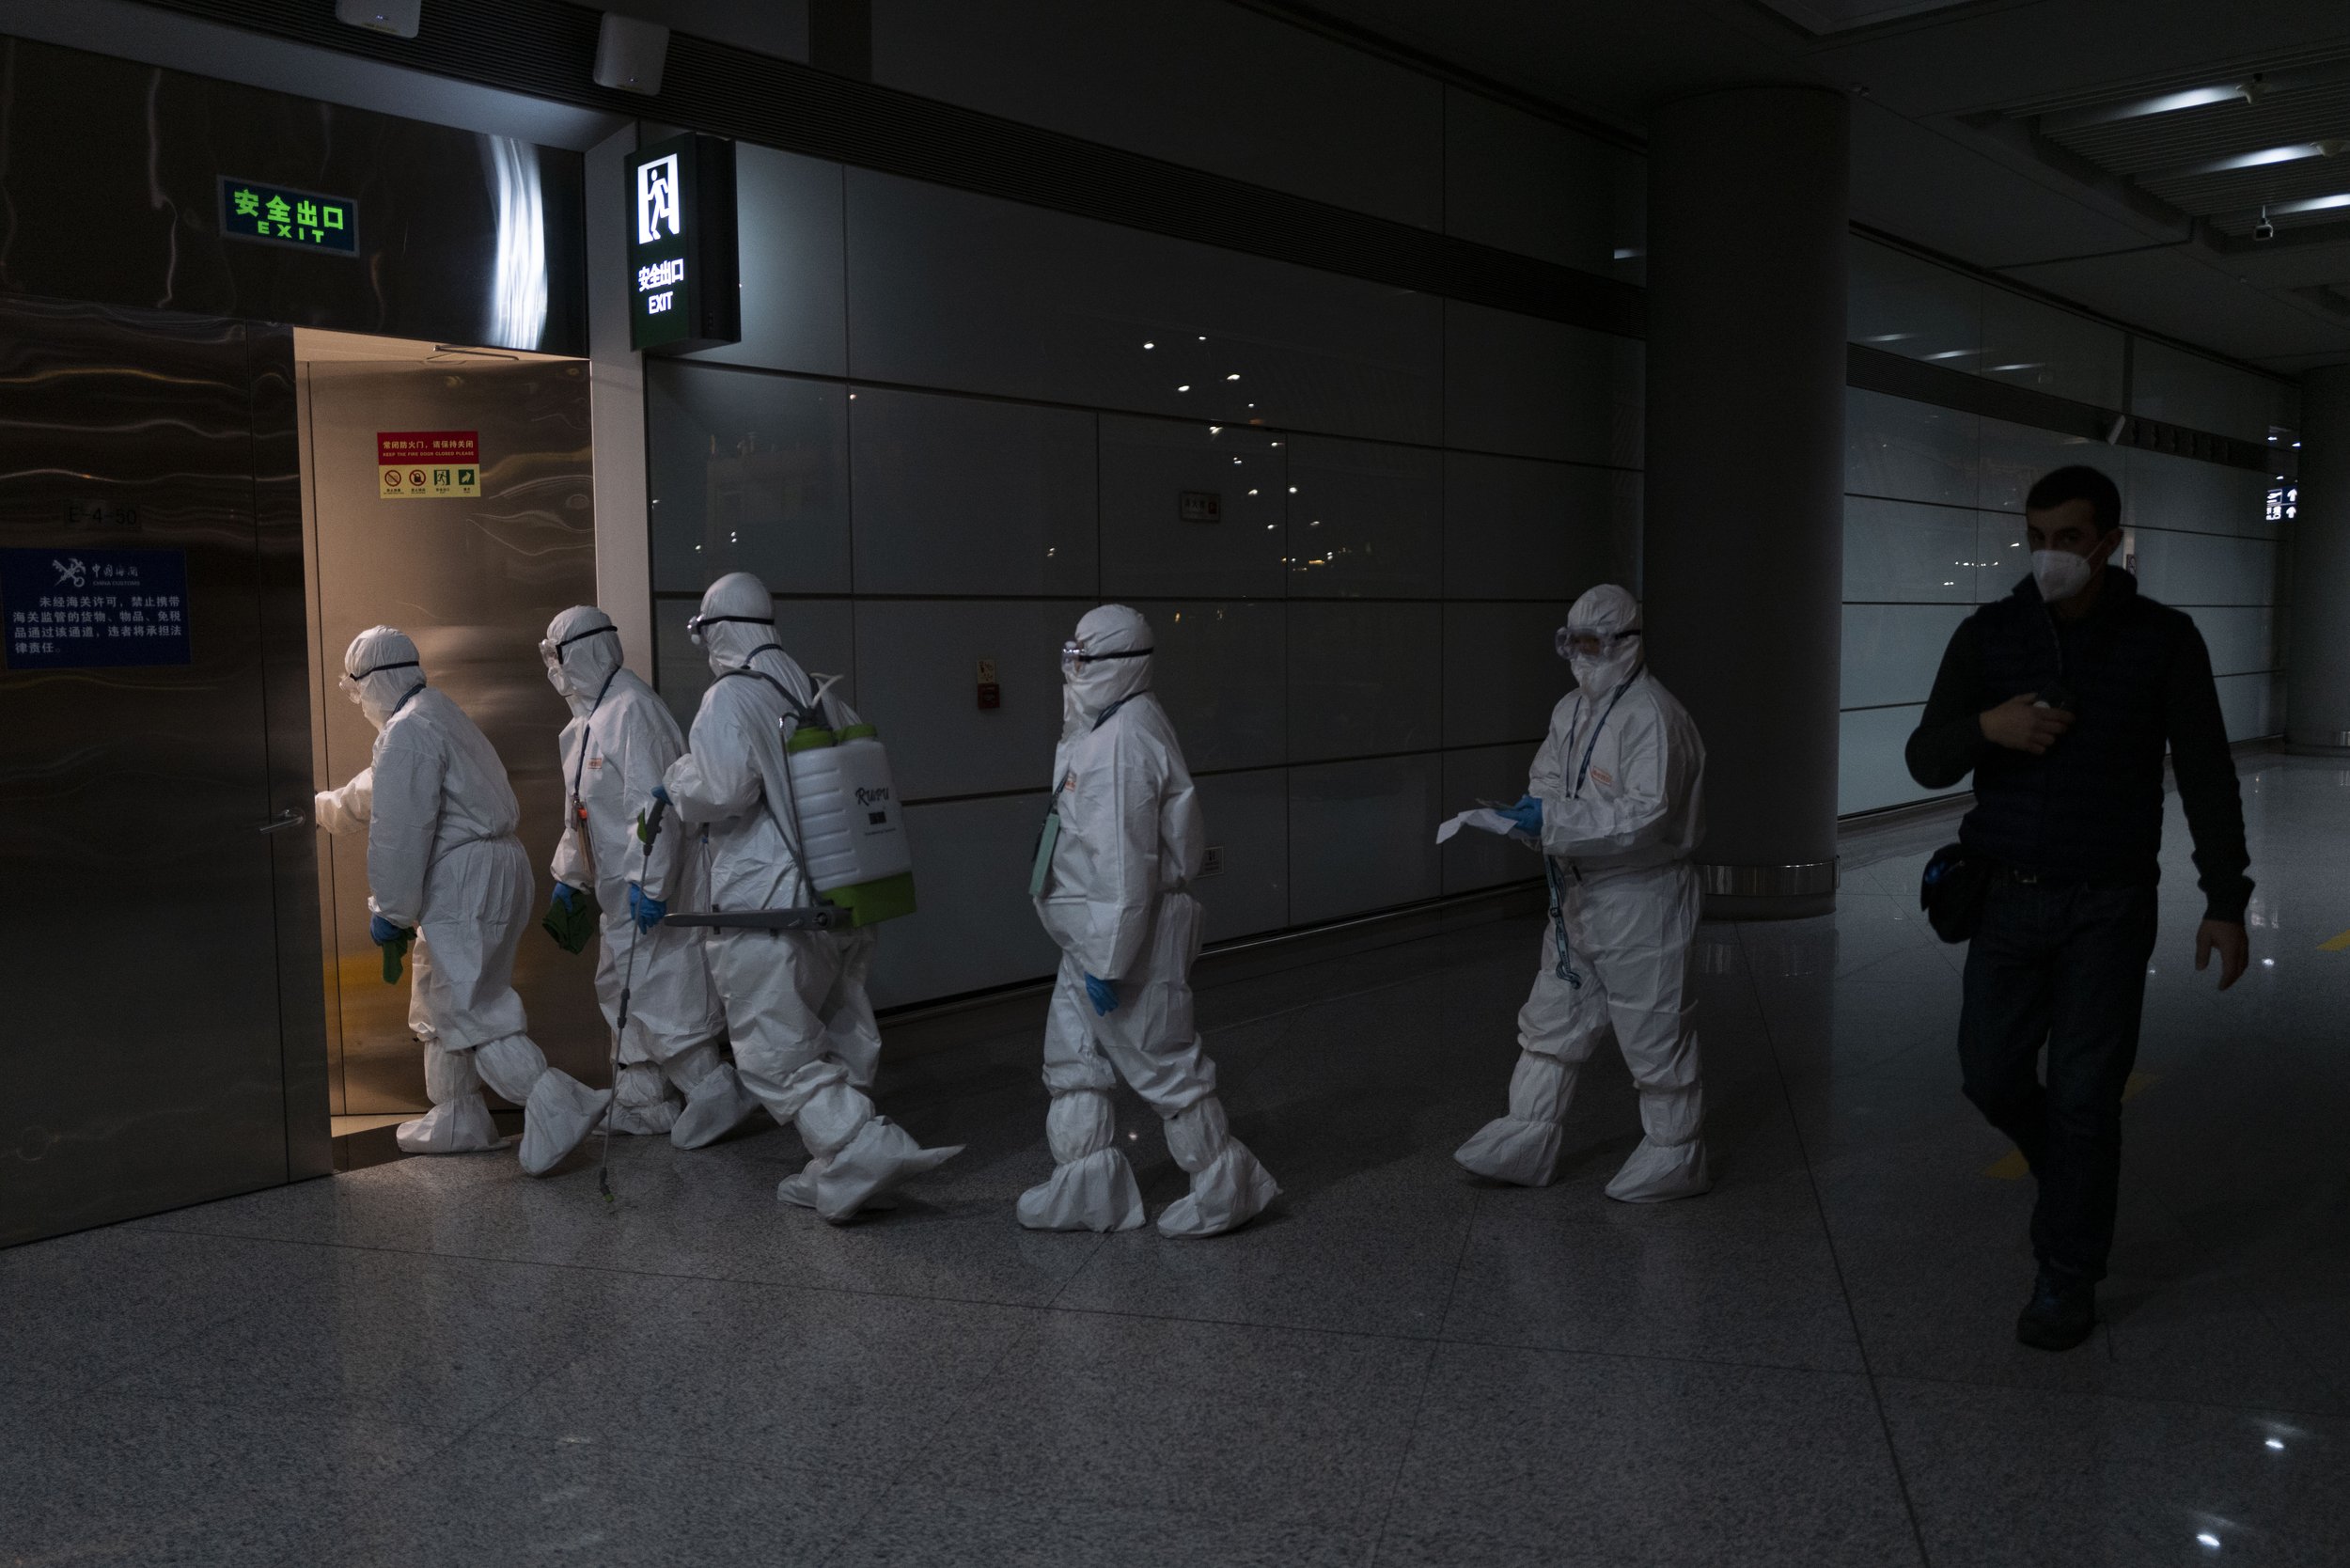  A passenger walks past airport employees in protective gear at the Beijing Capital International Airport at the 2022 Winter Olympics, Monday, Feb. 21, 2022, in Beijing. (AP Photo/Jae C. Hong) 